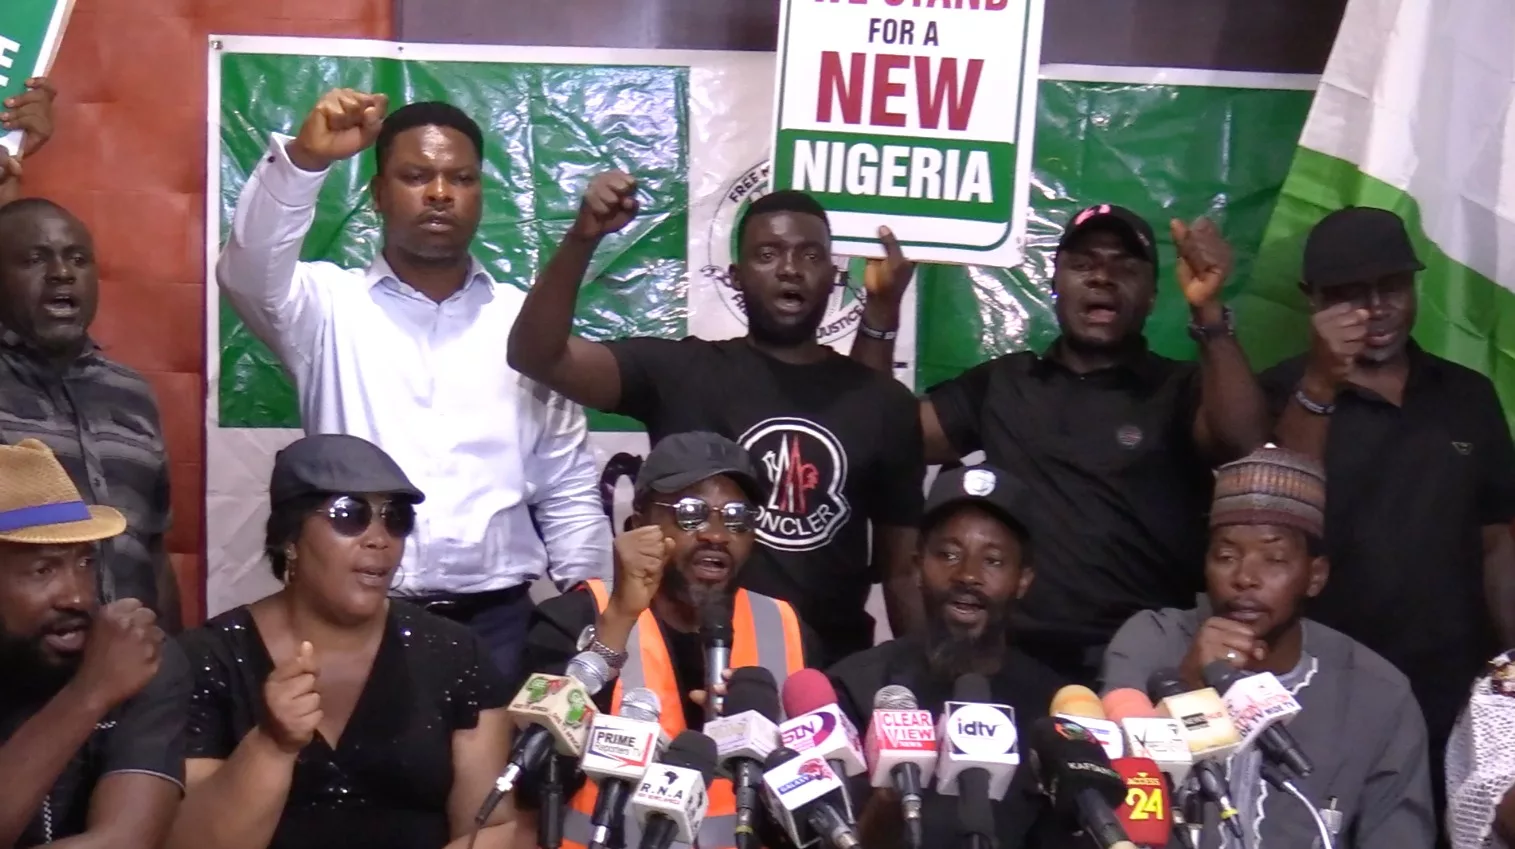 Calls for interim govt: We never asked military to take over – Free Nigeria Movement